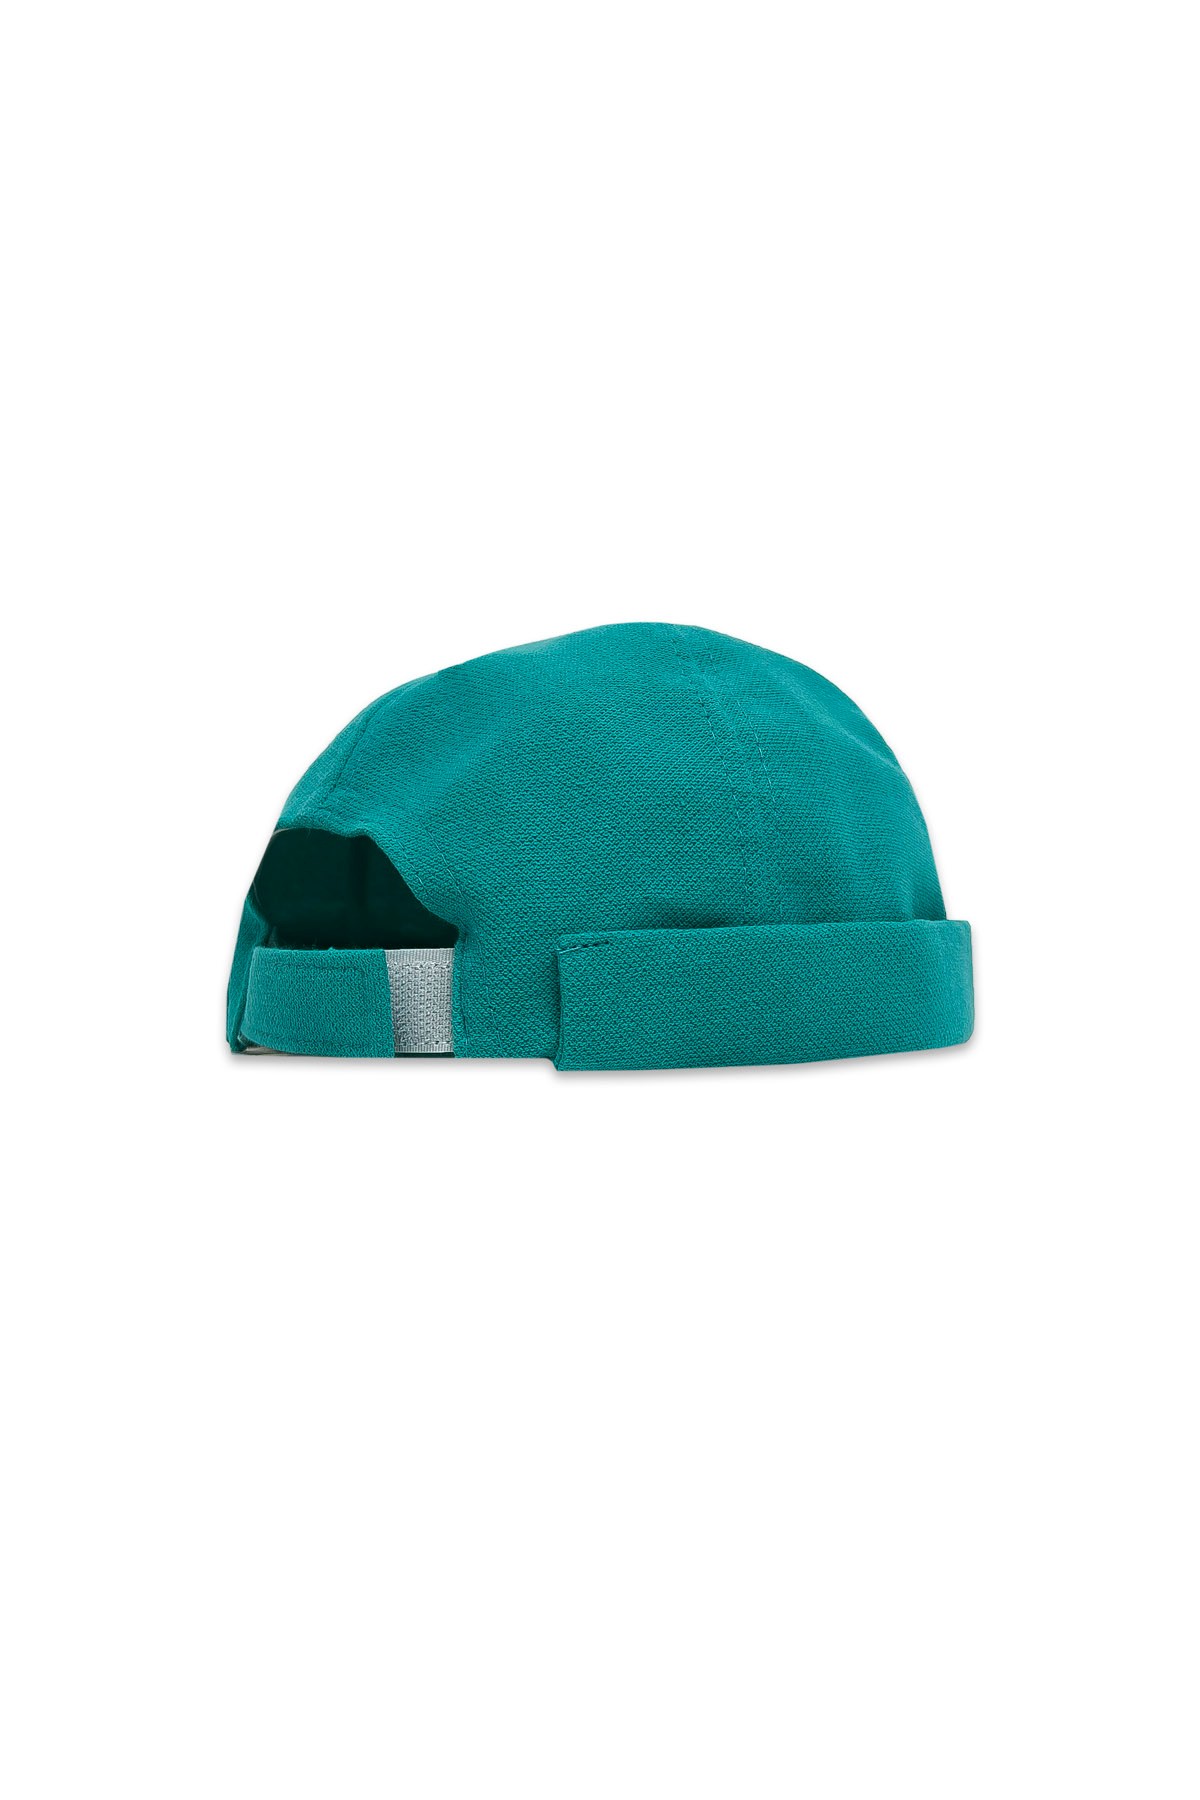 Nuo - Brimless Cap - WATER GREEN